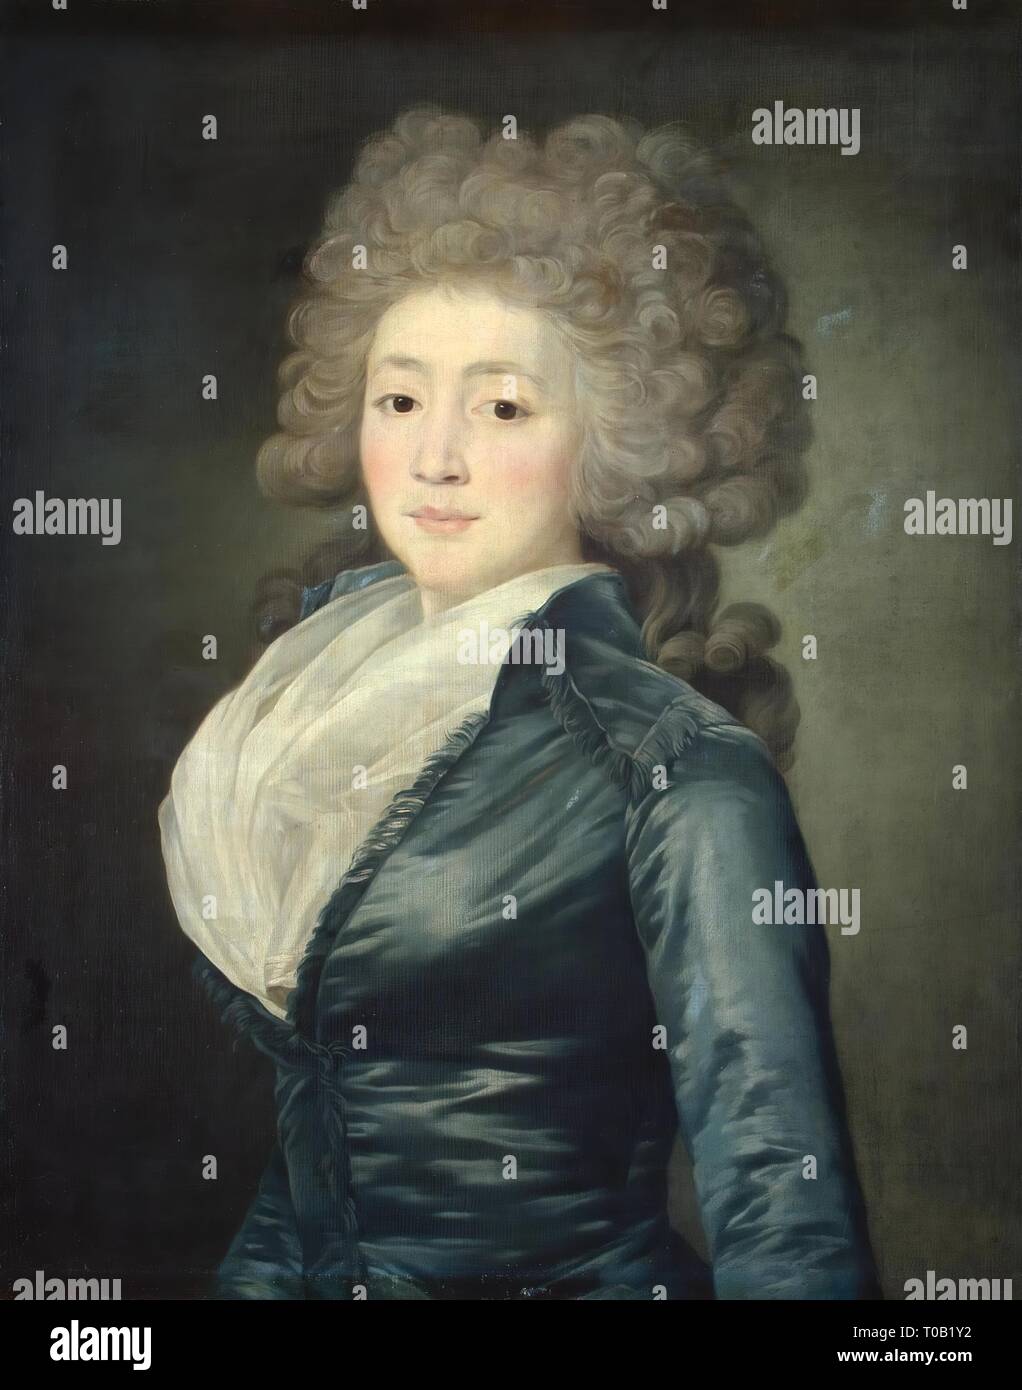 'Portrait of Olga Zherebtsova'. France, second half of the 18th century. Dimensions: 73,5x58 cm. Museum: State Hermitage, St. Petersburg. Author: Jean Louis Voille. Stock Photo